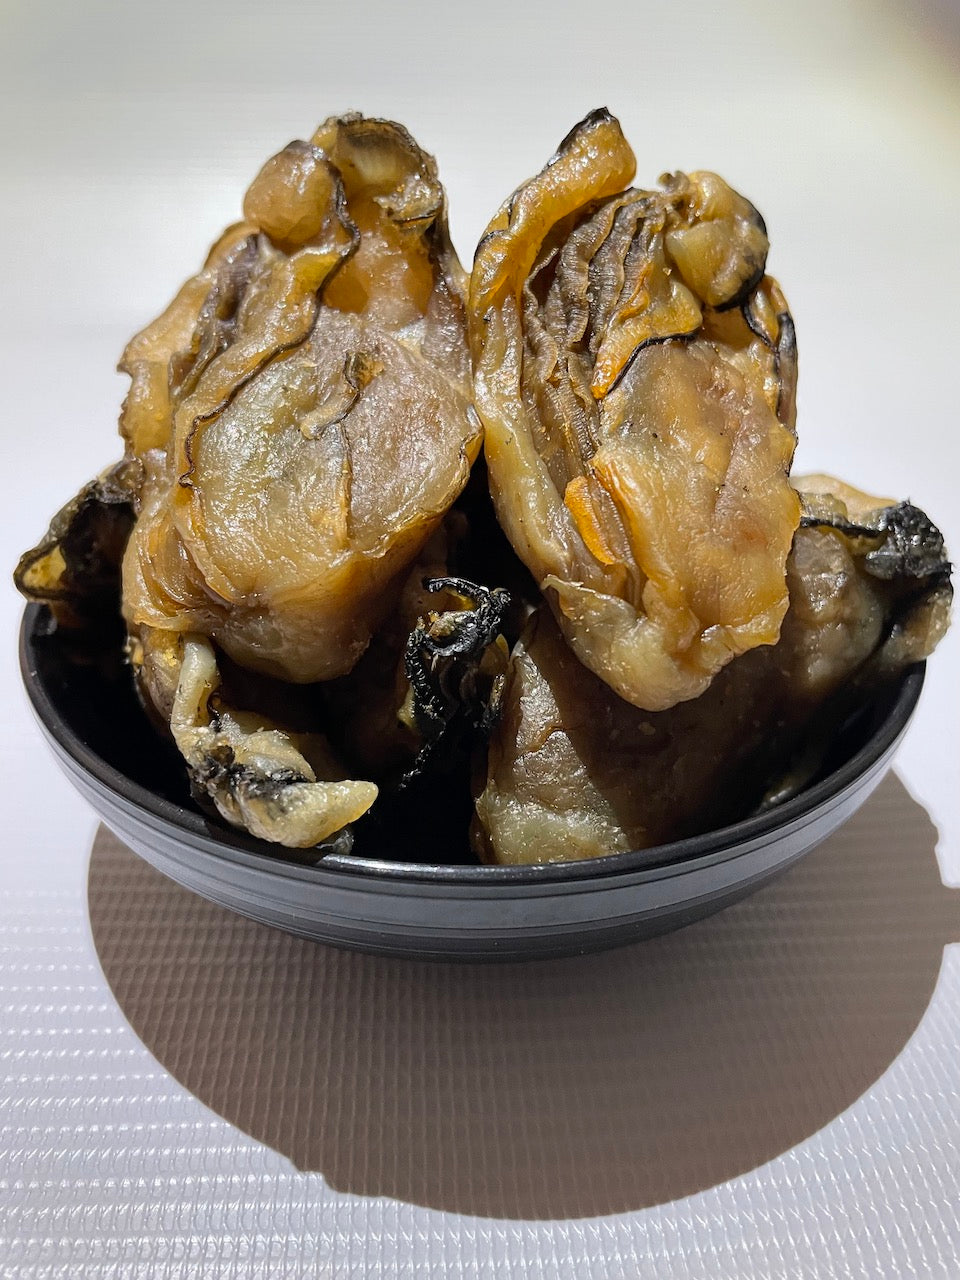 Japanese Top Grade Dried Oyster (LLL Size) 日本特大LLL生晒蚝干 8oz or 16oz